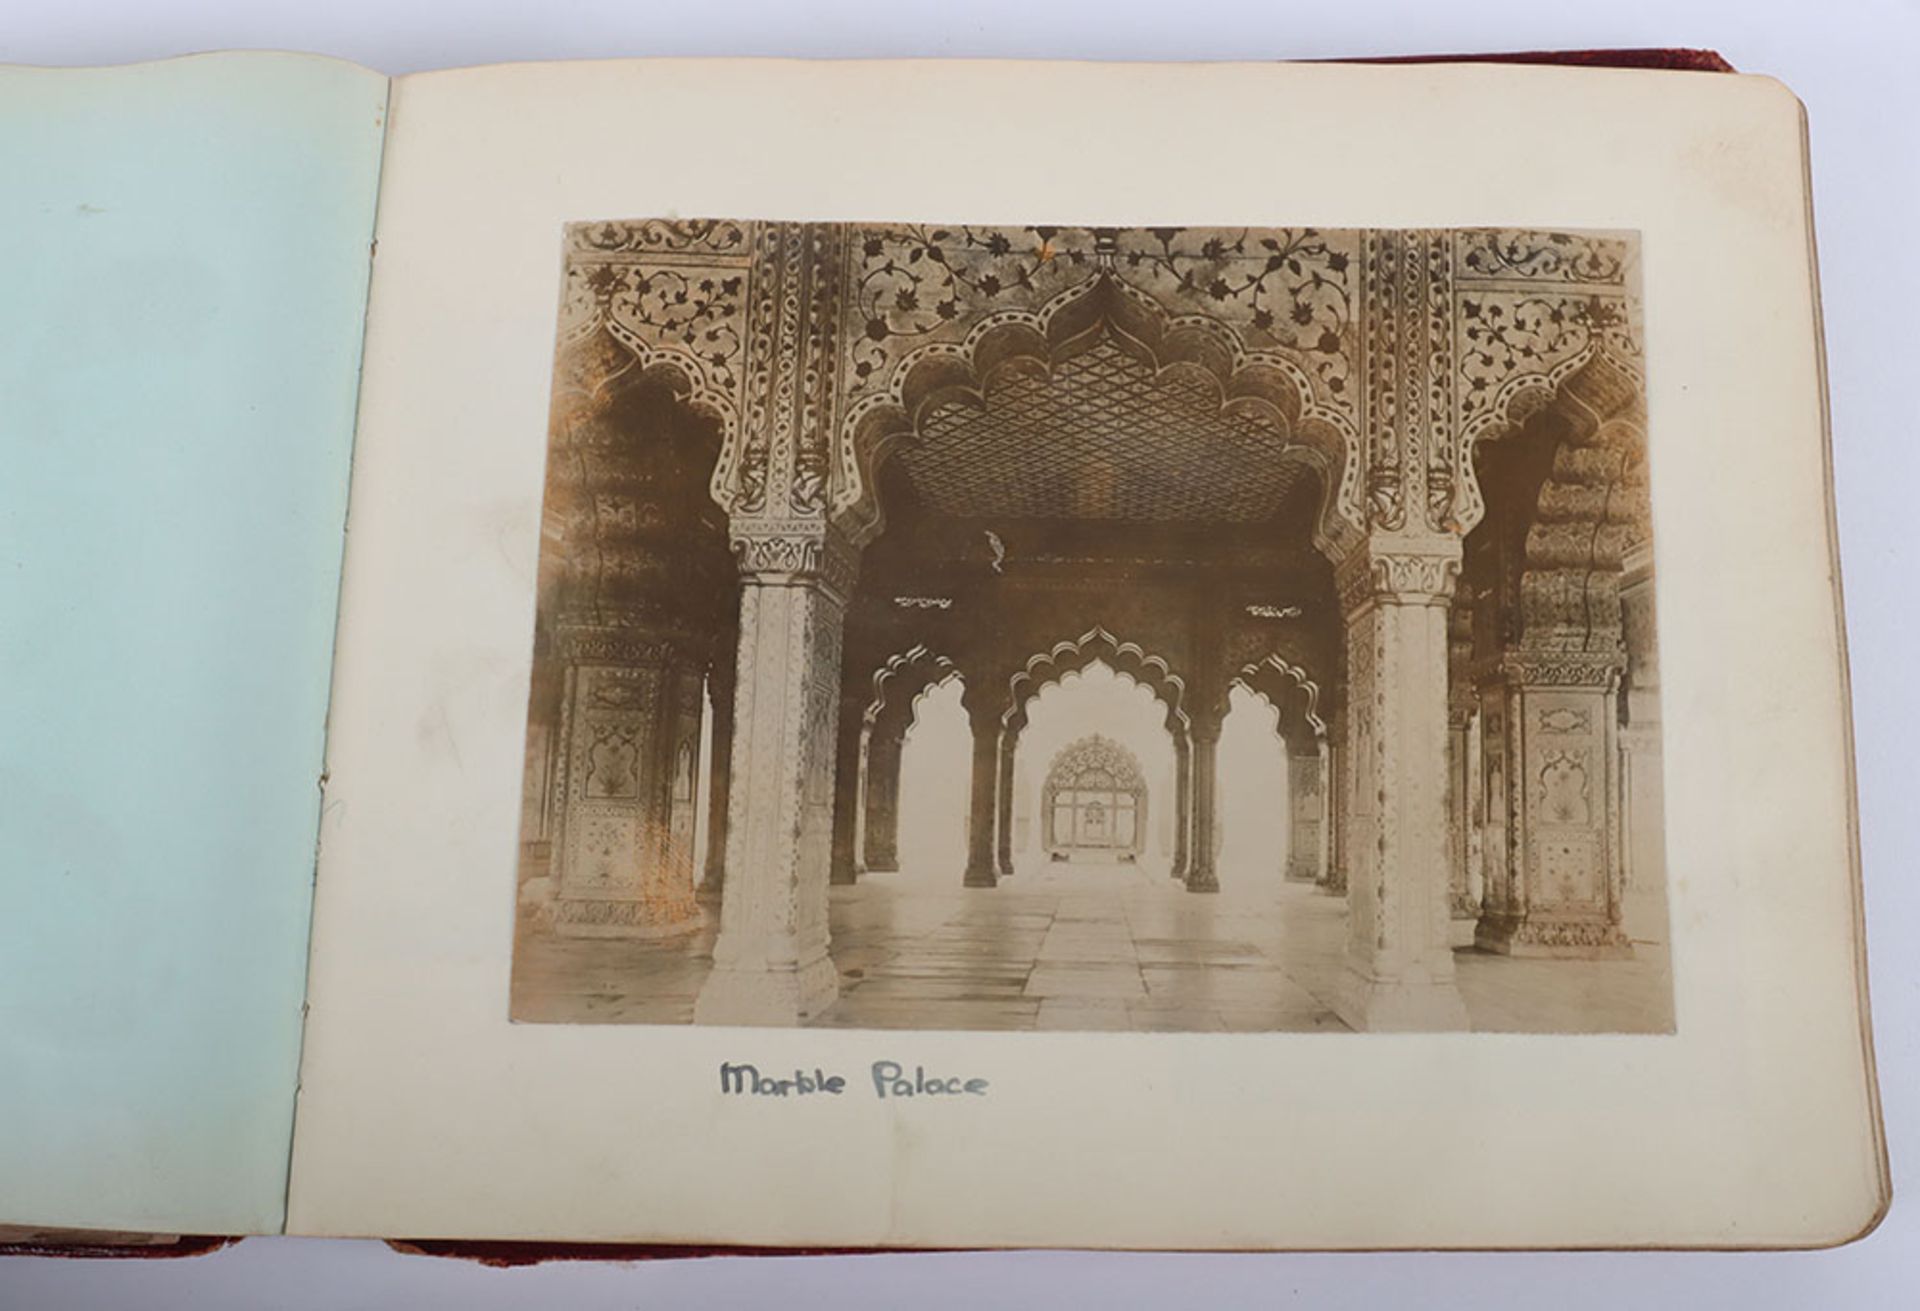 Photograph Album with images of ther Delhi Durbar, troops lining streets, Elephants, sacred cows bel - Image 27 of 48